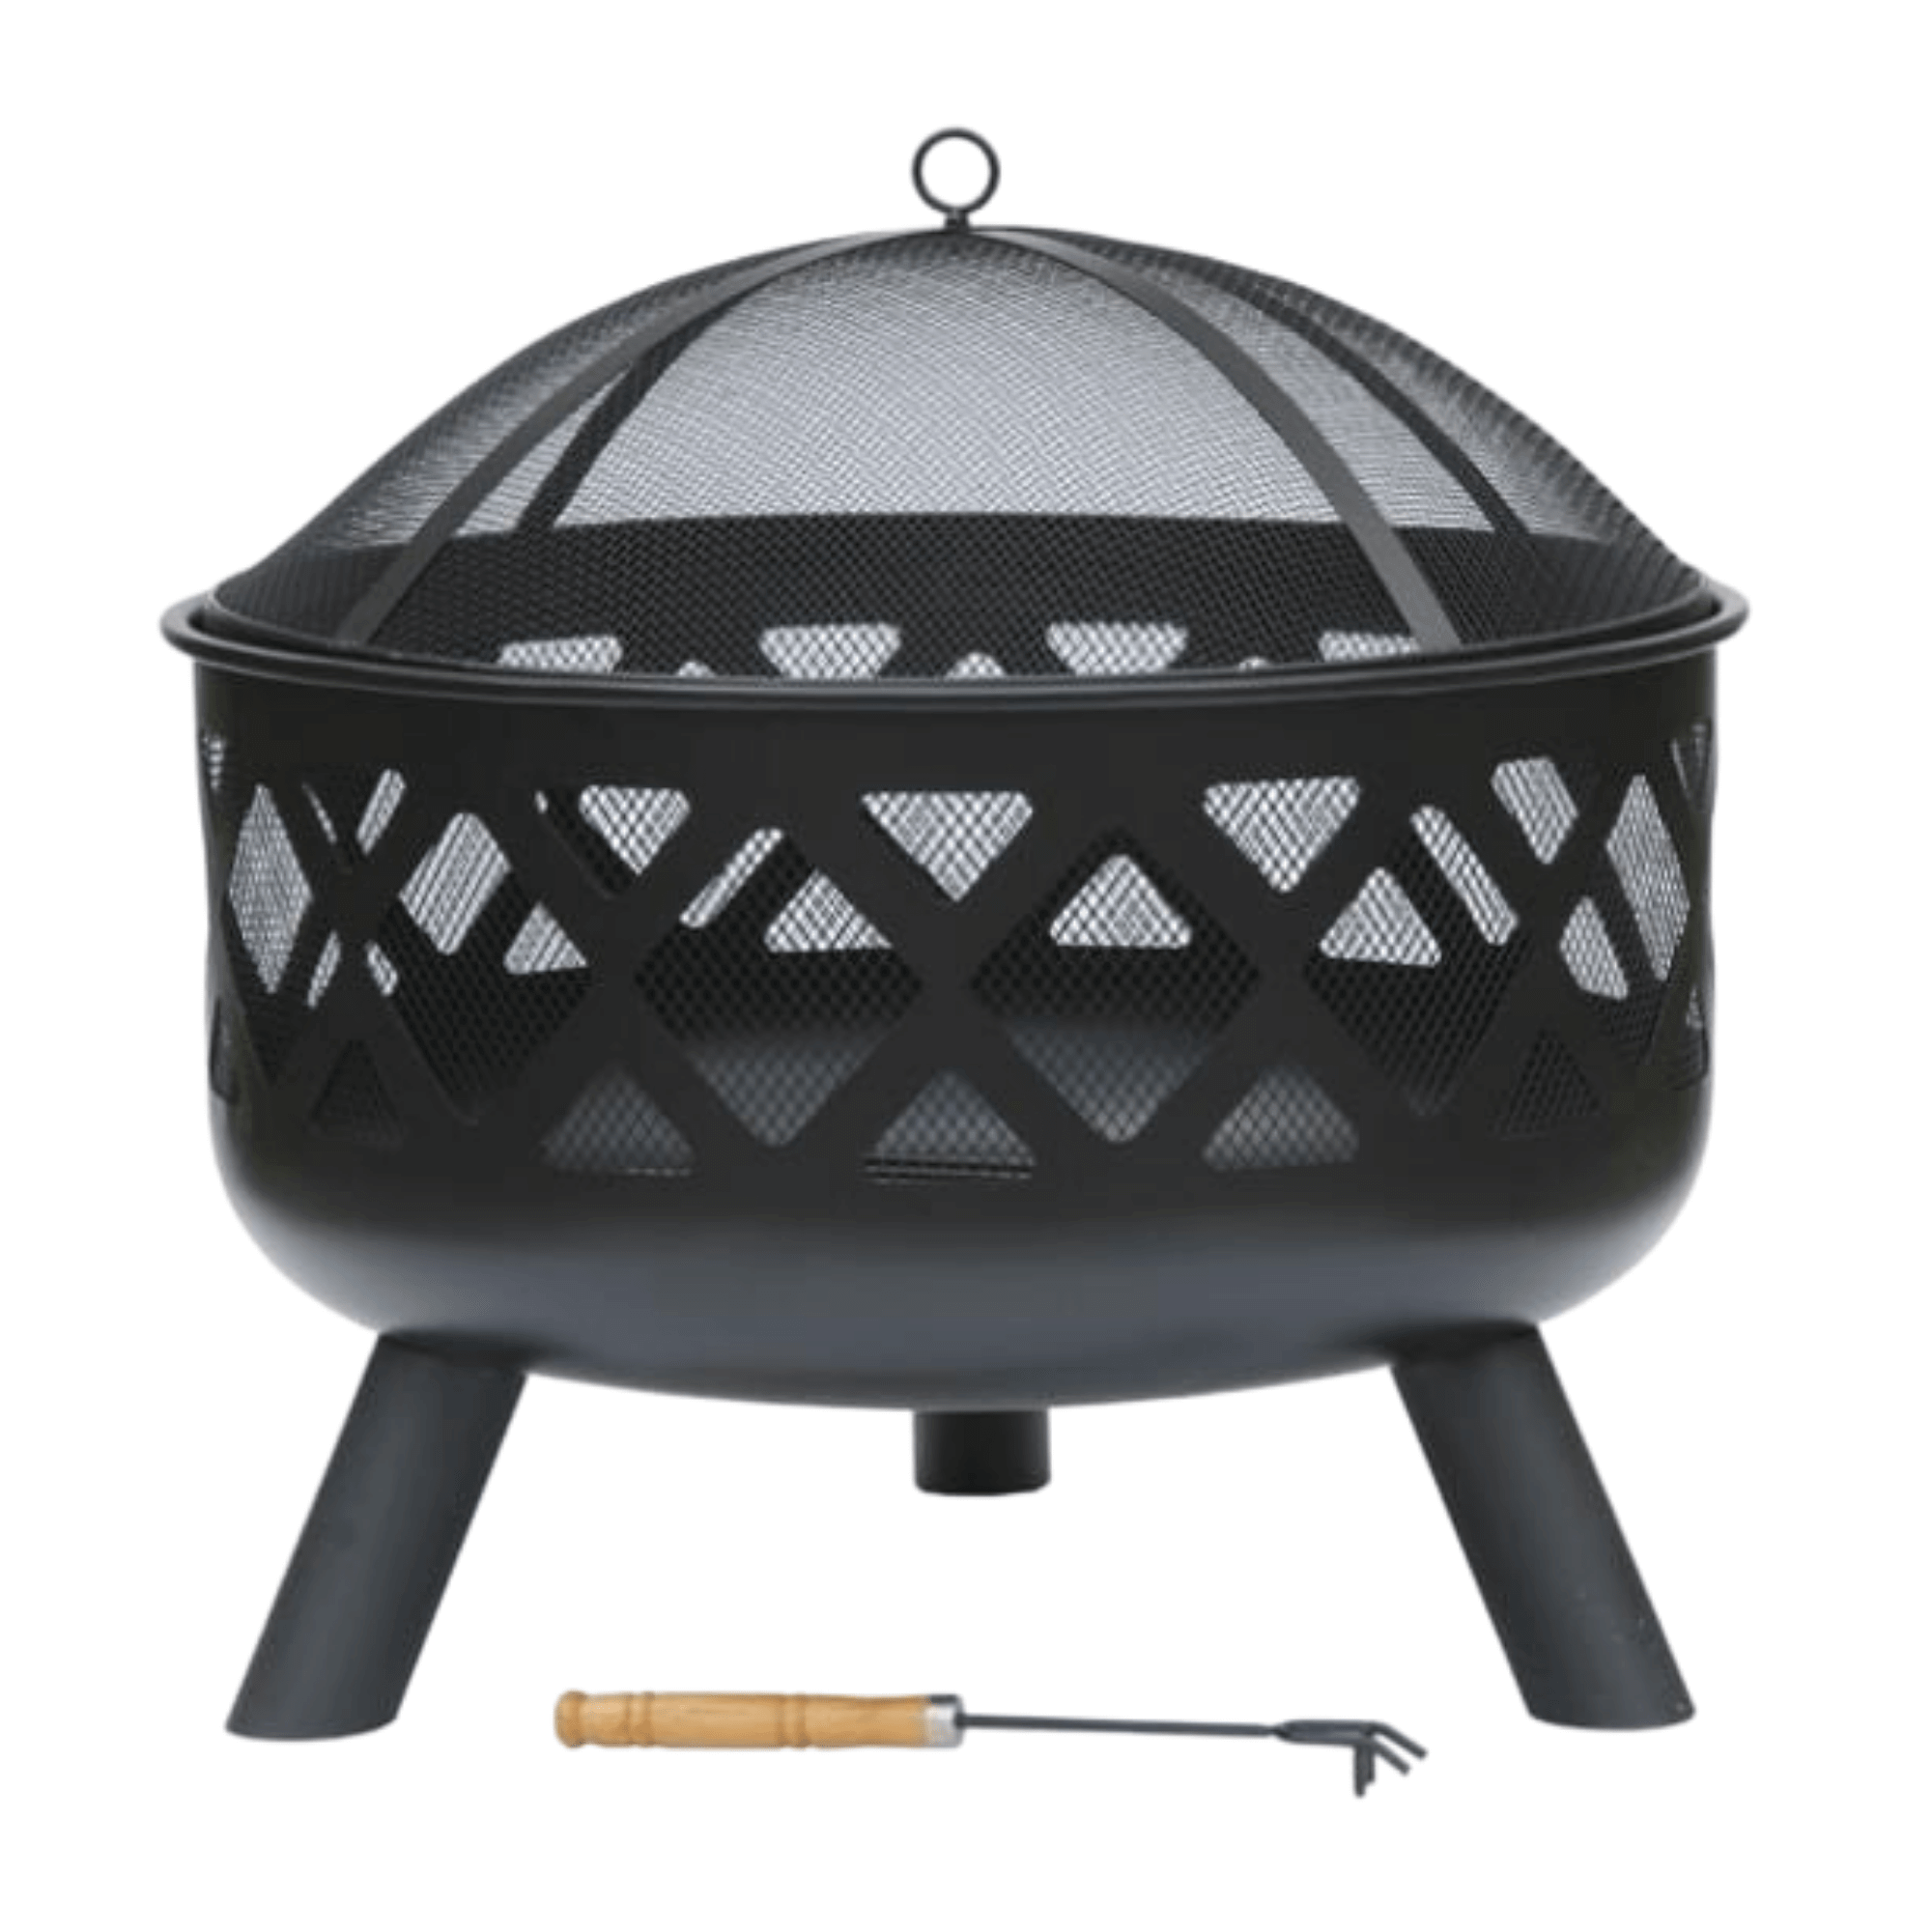 Perfect Patio Deep-drawn fire bowl with criss-cross cut-out view of fire